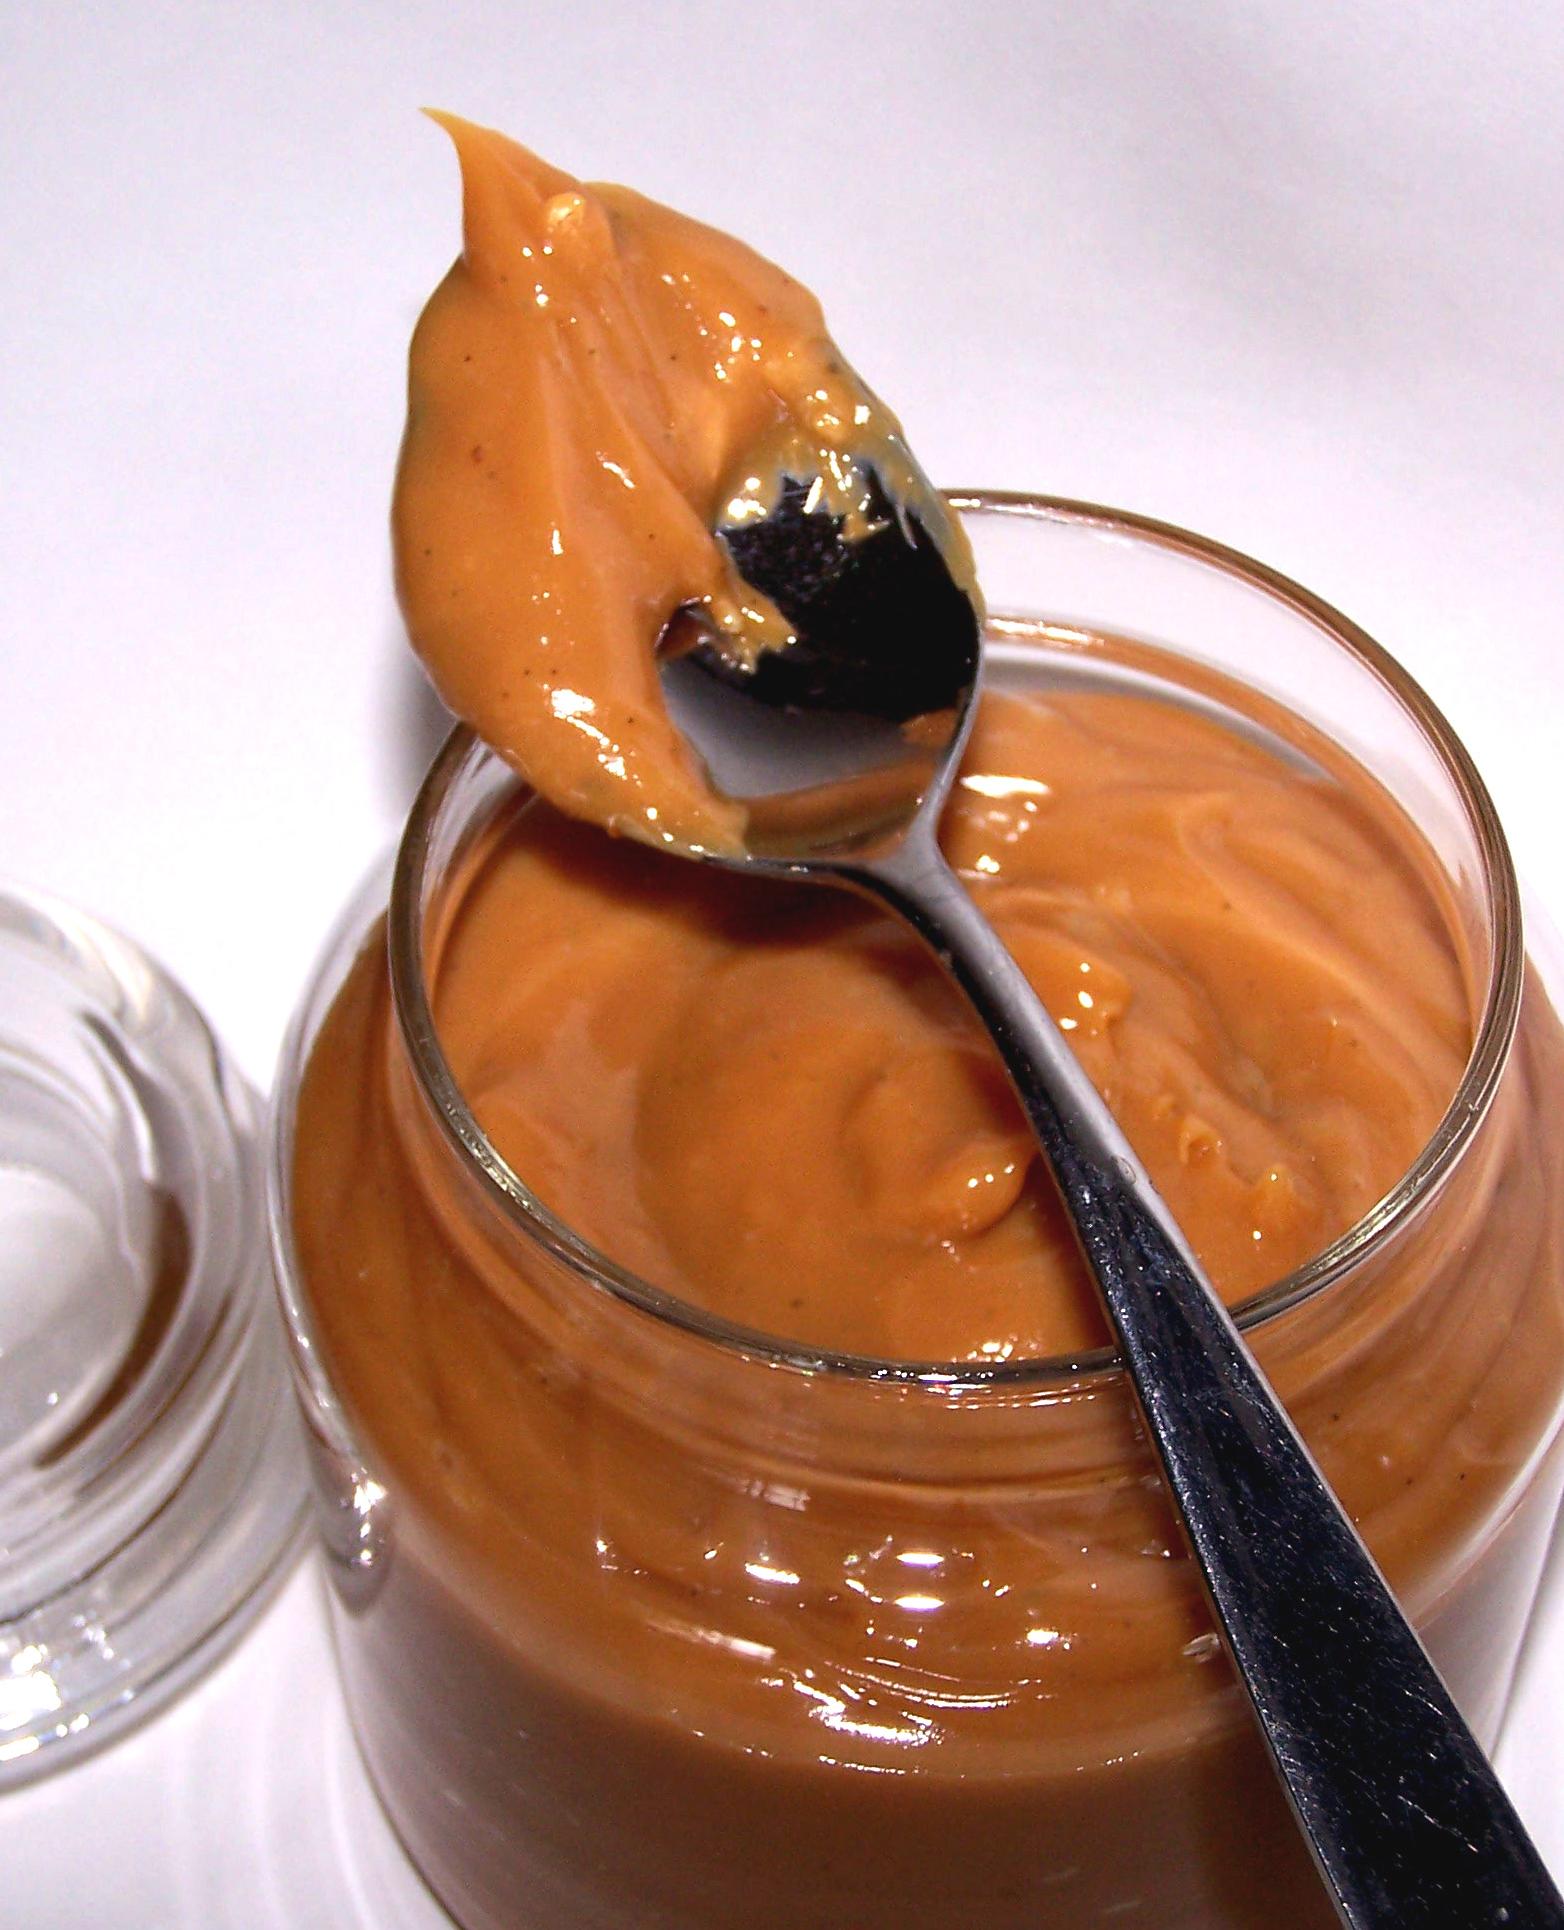  With its rich flavor and buttery texture, Dulce de Leche is the perfect topping for pancakes, waffles or cereal bowls.